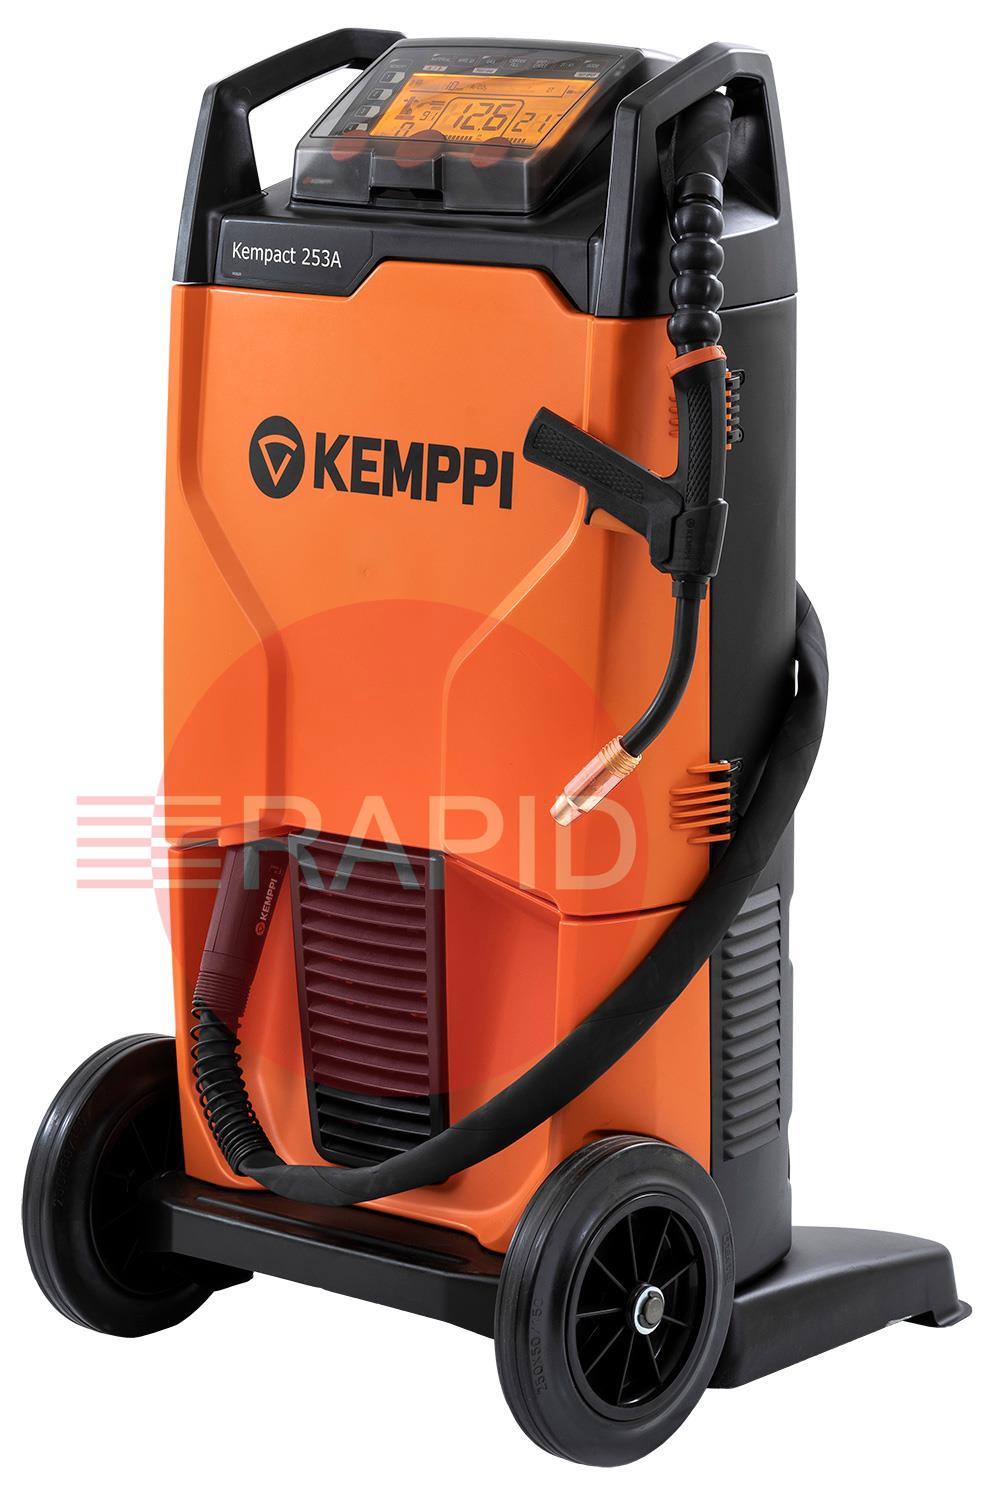 P2210GXE  Kemppi Kempact RA 253A, 250A 3 Phase 400v Mig Welder, with Flexlite GXe 305G 5.0m Torch